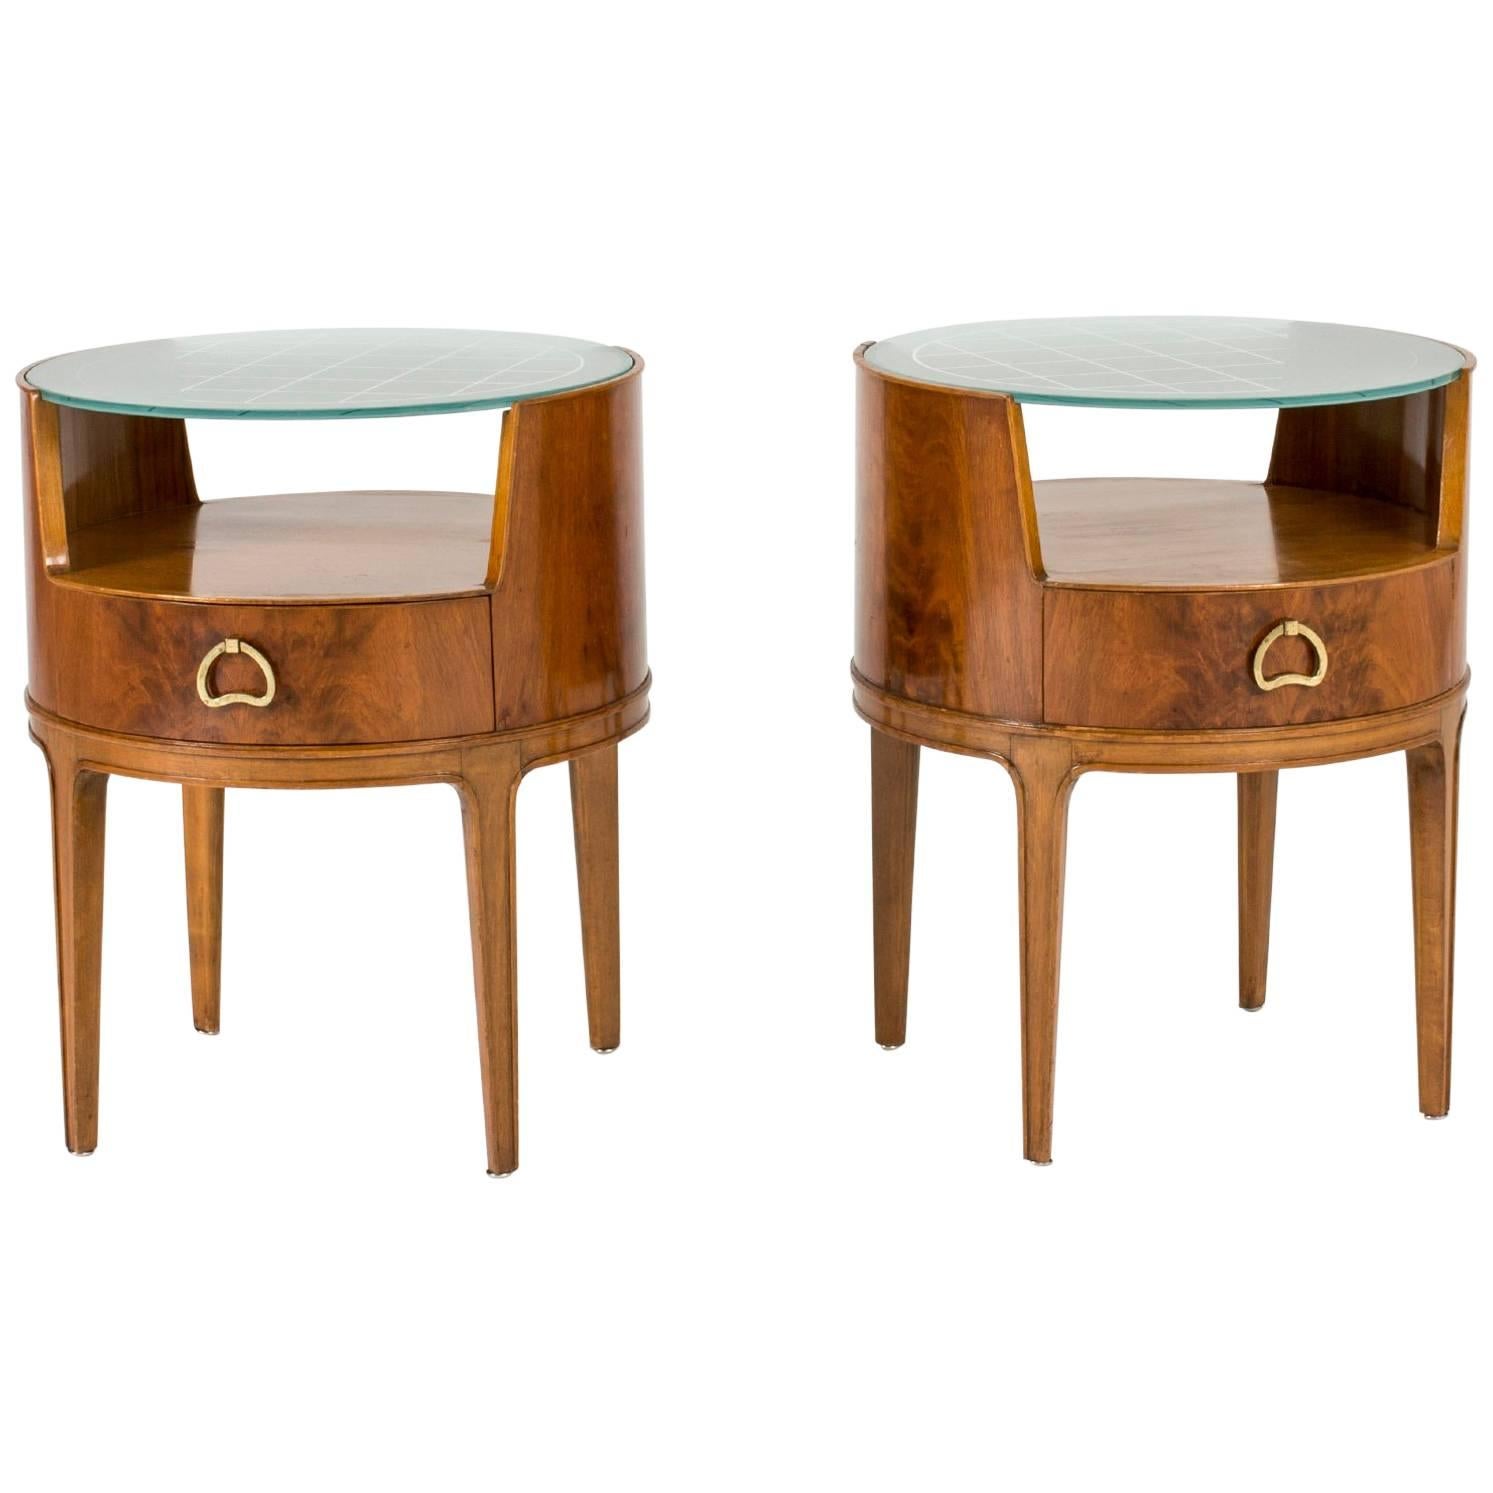 Pair of Mahogany and Glass Bedside Tables by Axel Larsson